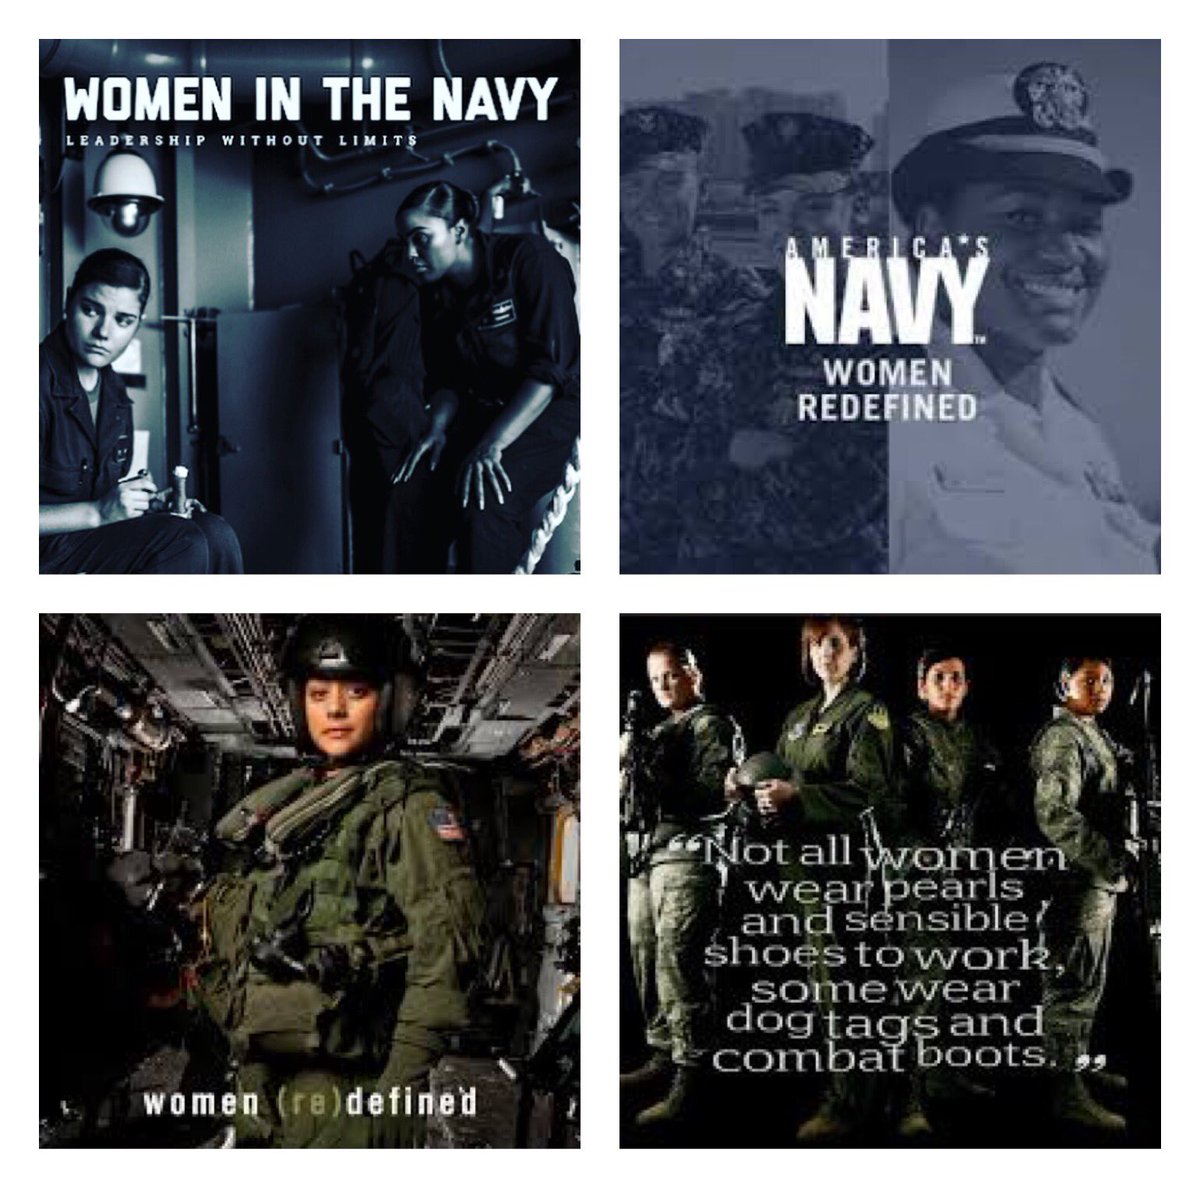 ⚓️🇺🇸The Navy is looking for bright young women to serve in over 100 different career fields.
#WomenRedefined #ForgedByTheSea #WomenInTheNavy